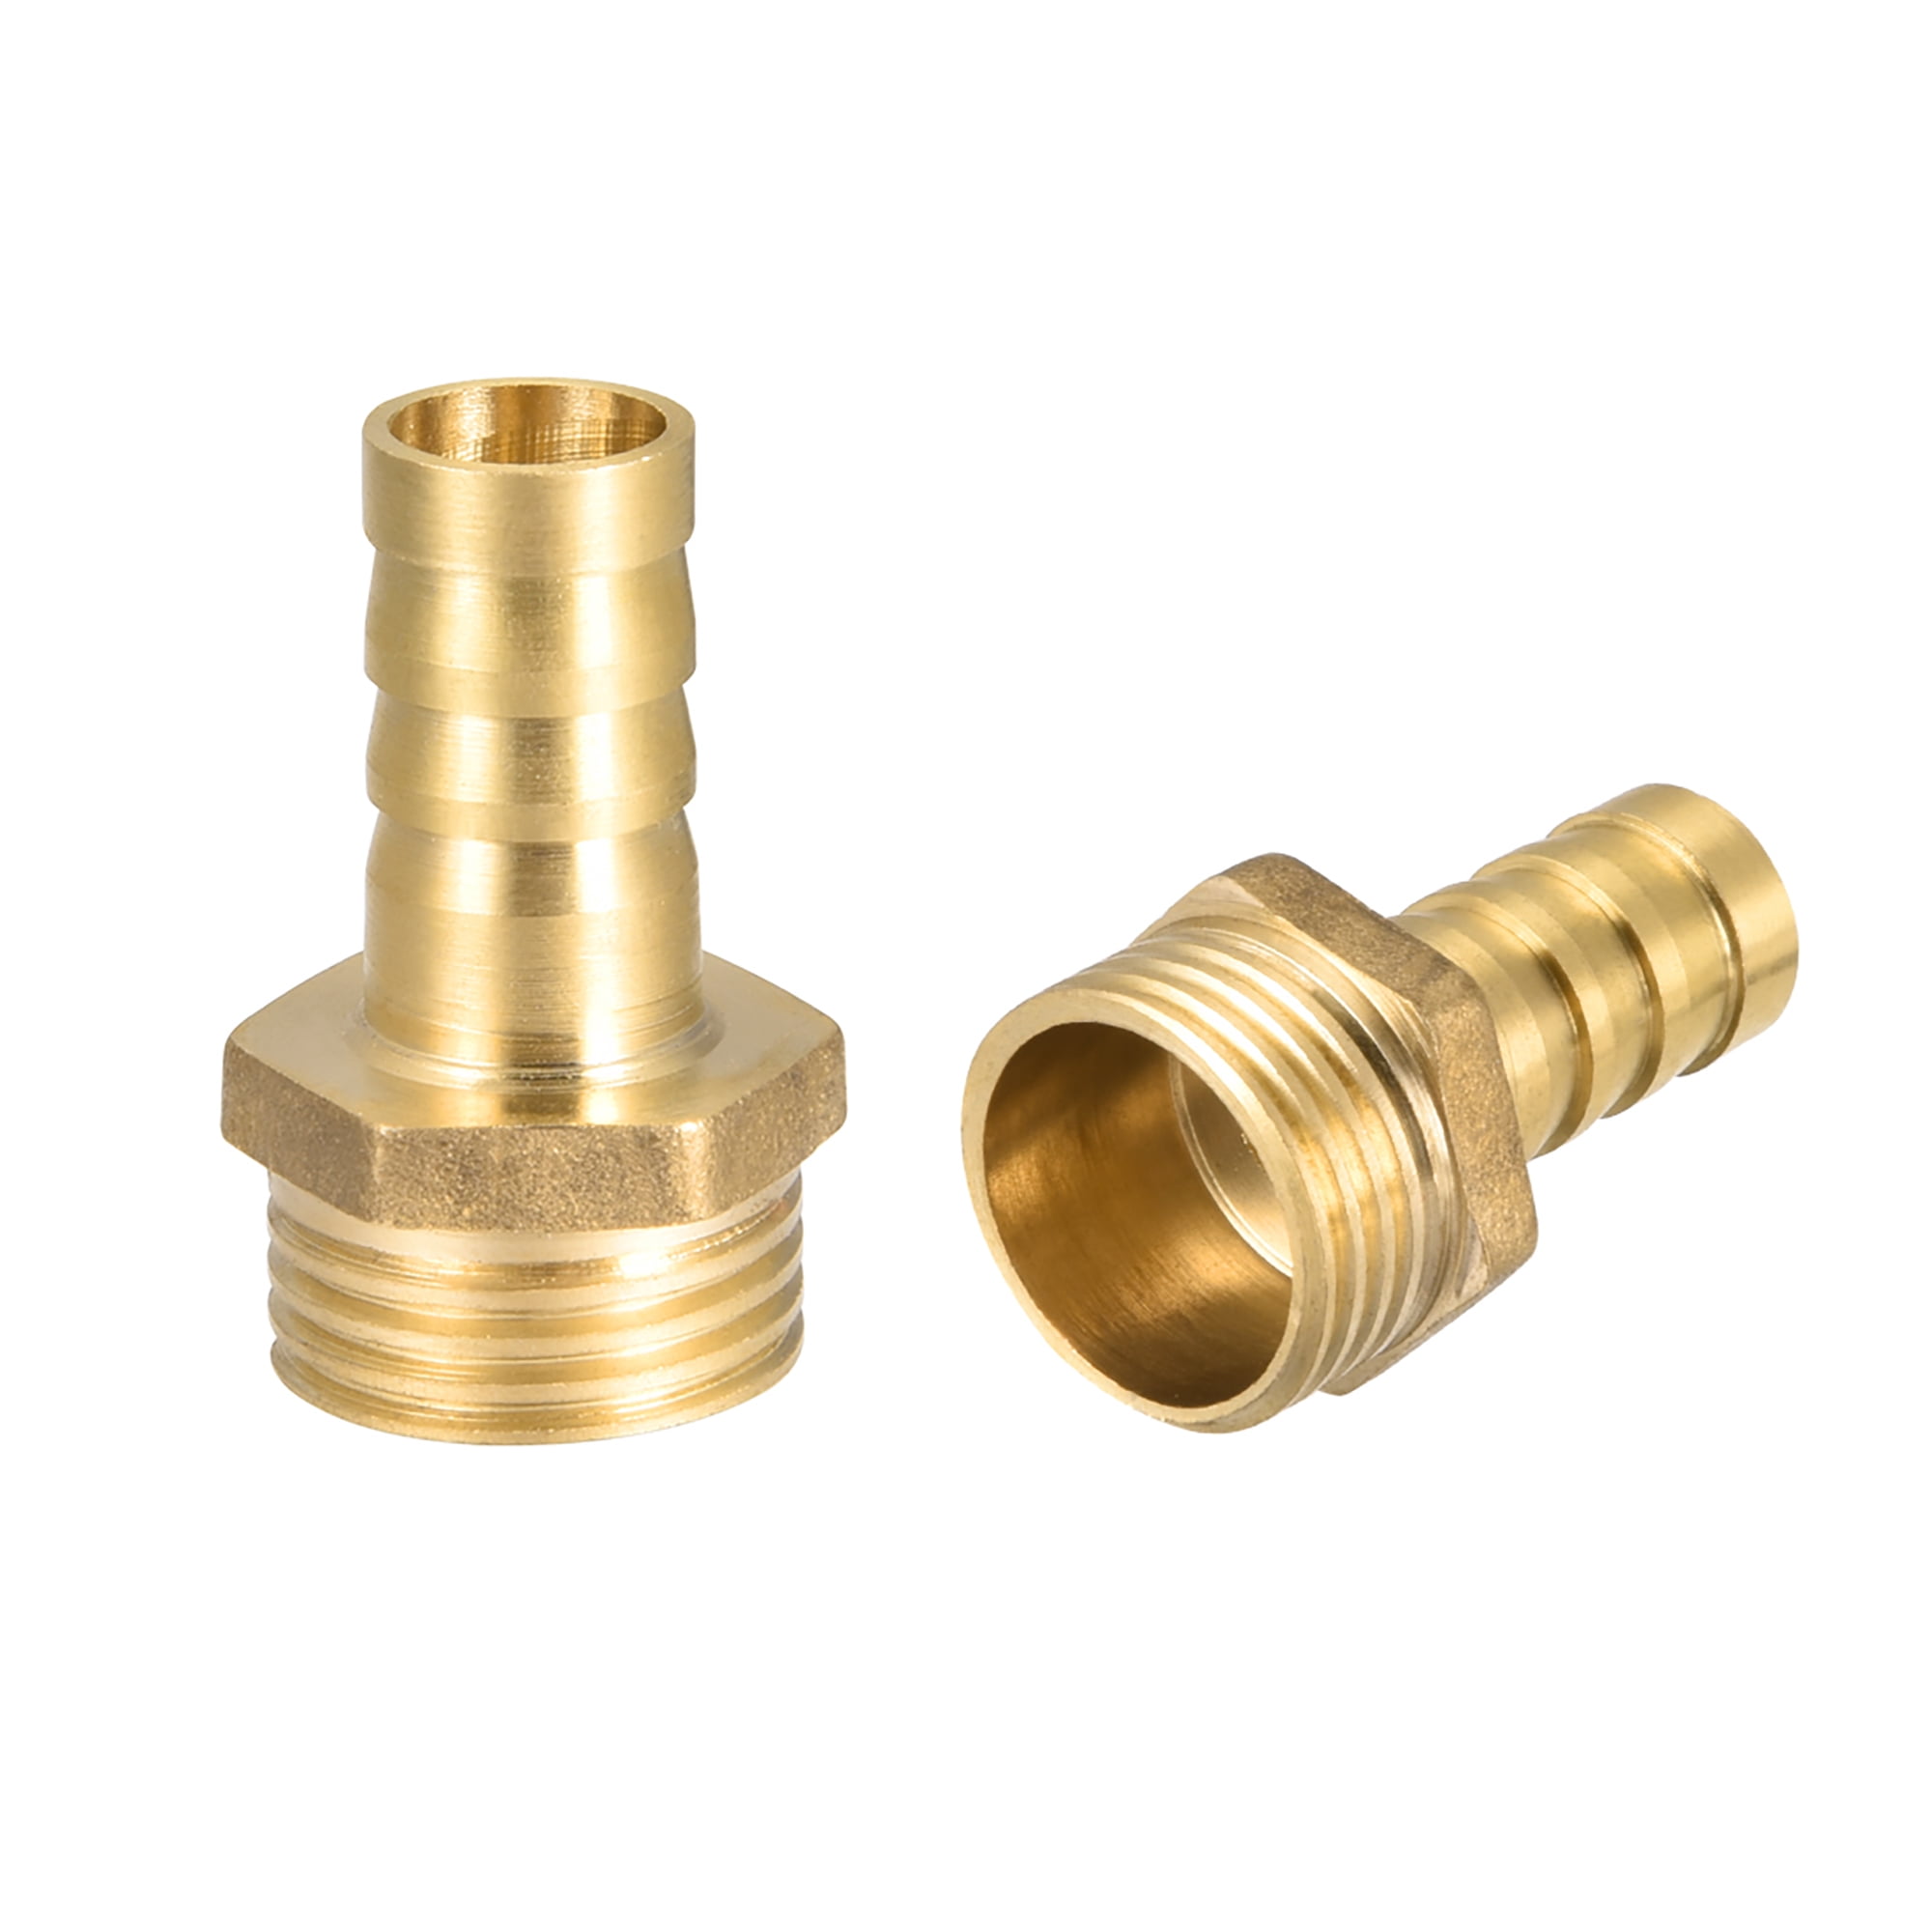 Hose Barb Copper Four Way Valve Fitting Connector Valve Barb Barbed Pipe Fitting